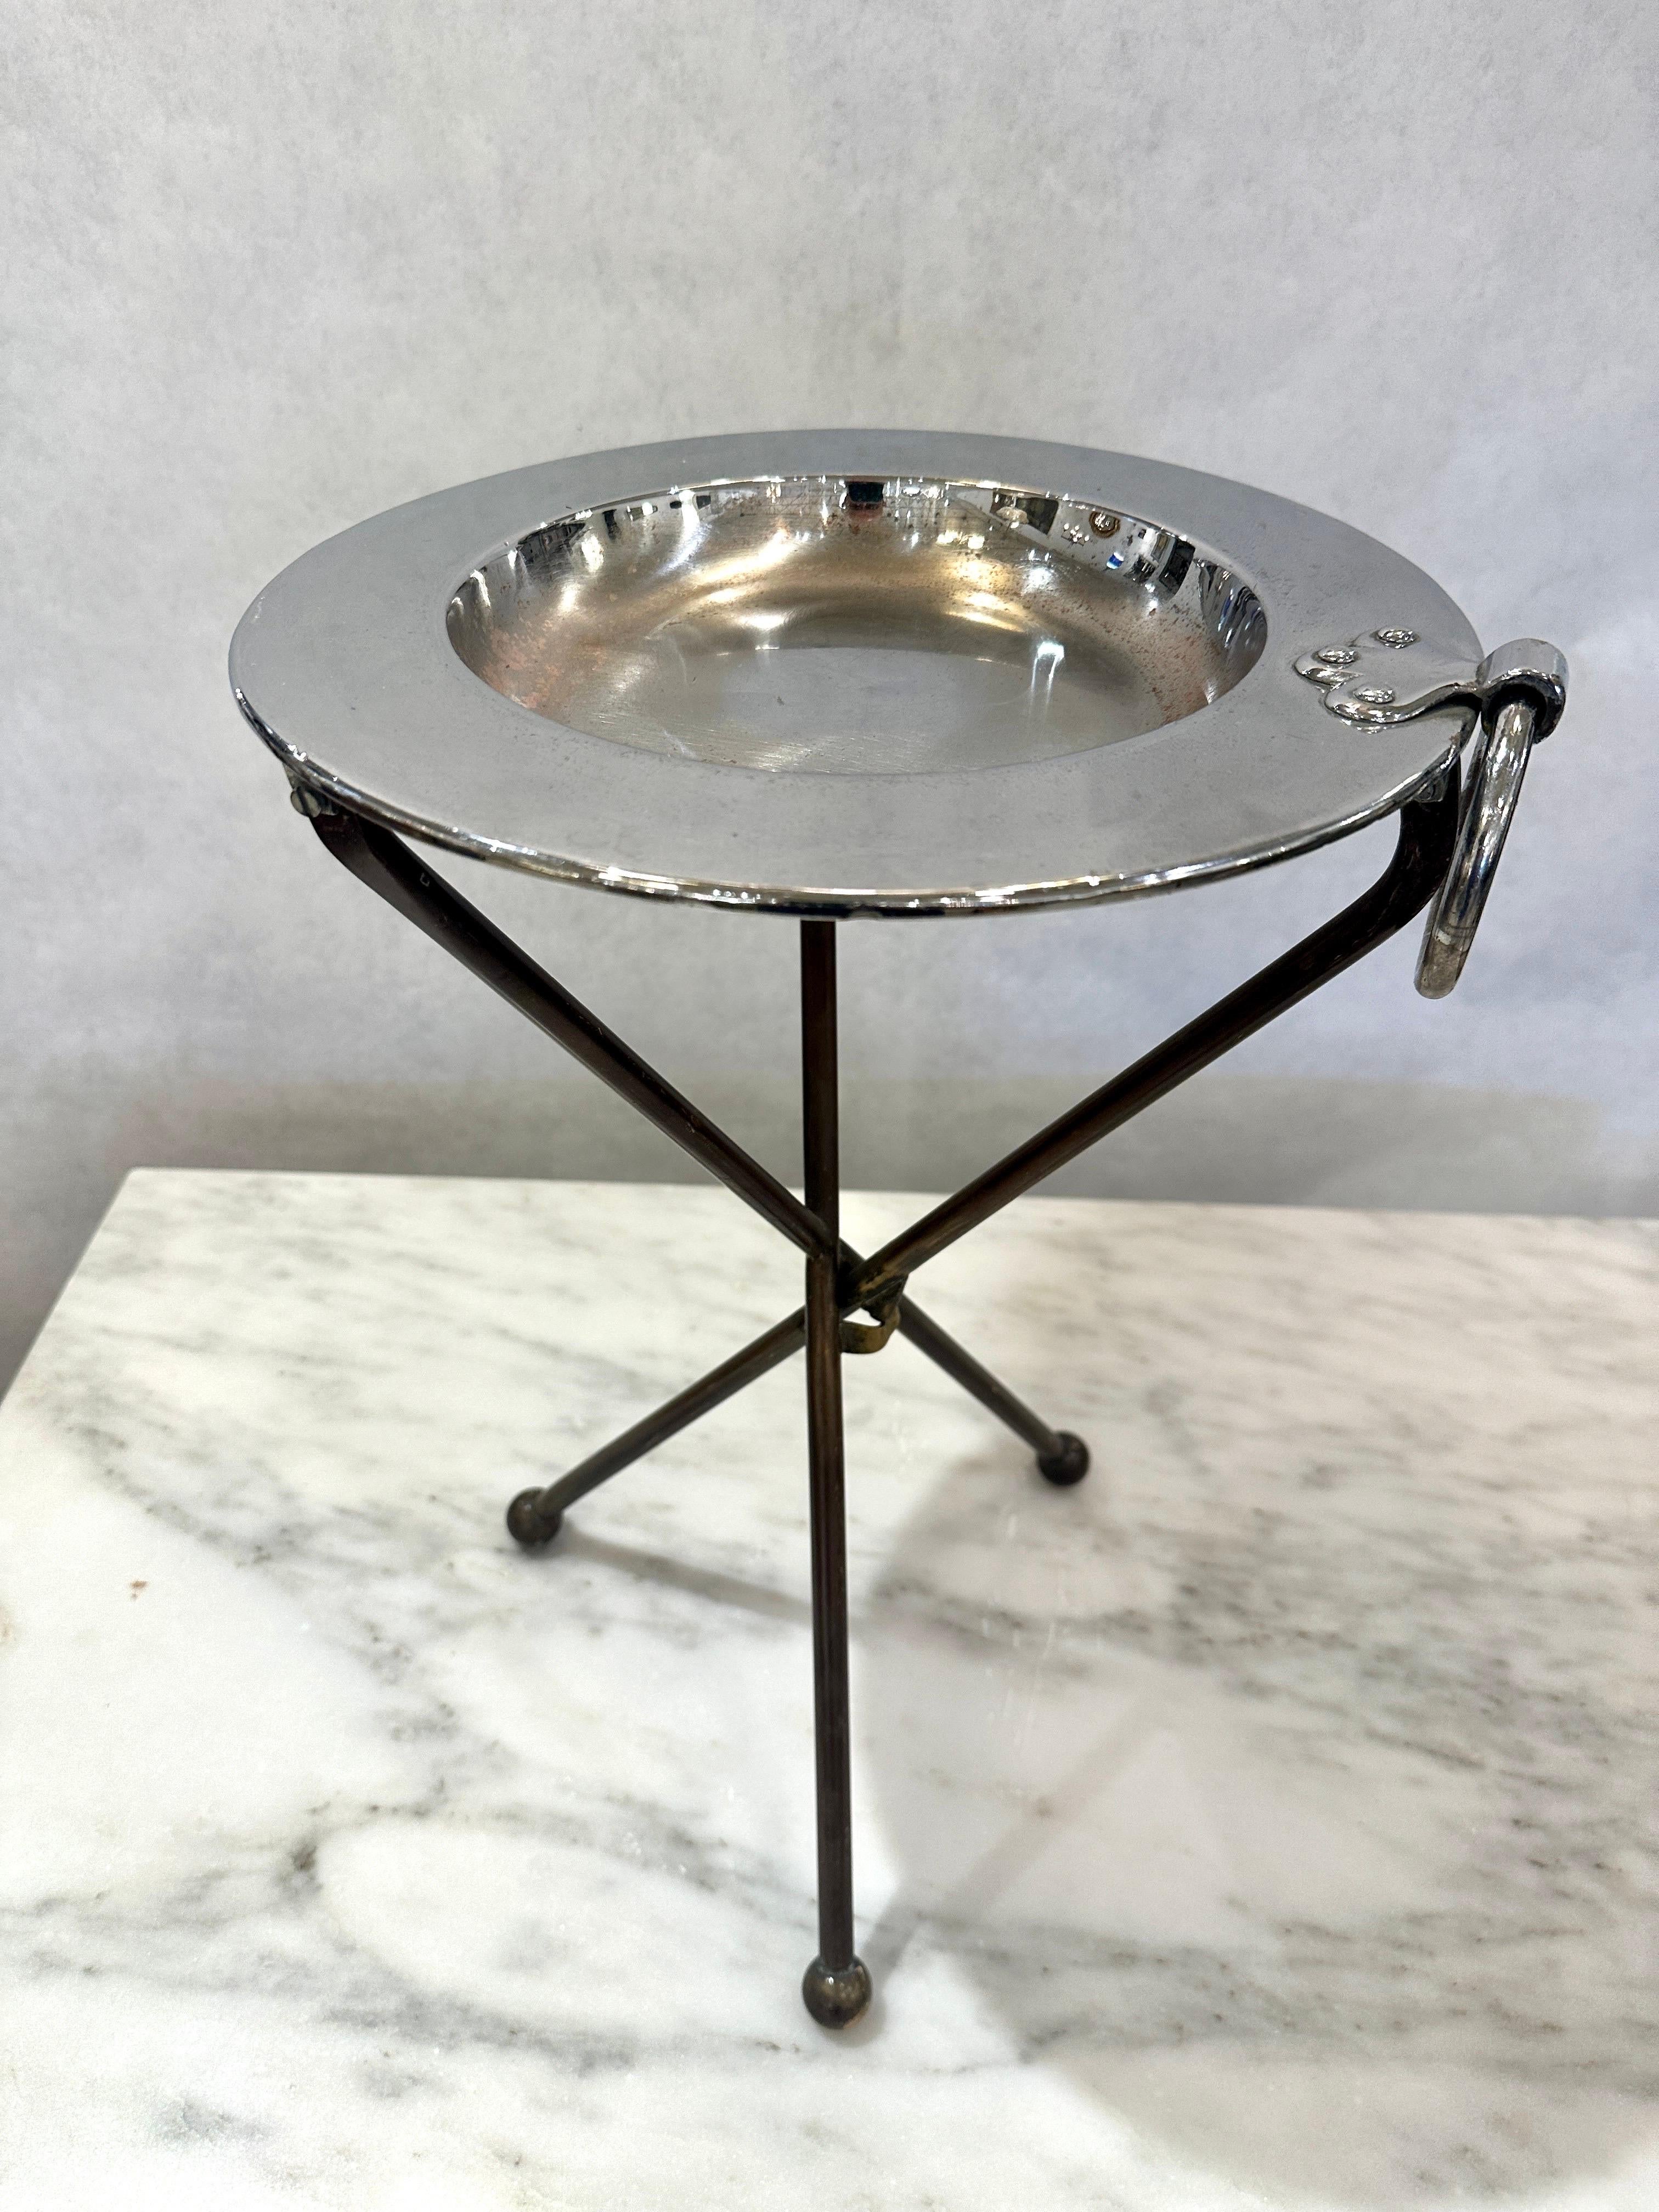 Neoclassical Style Brass & Nickeled Metal Guéridon / Collapsing Side Table In Good Condition For Sale In East Hampton, NY